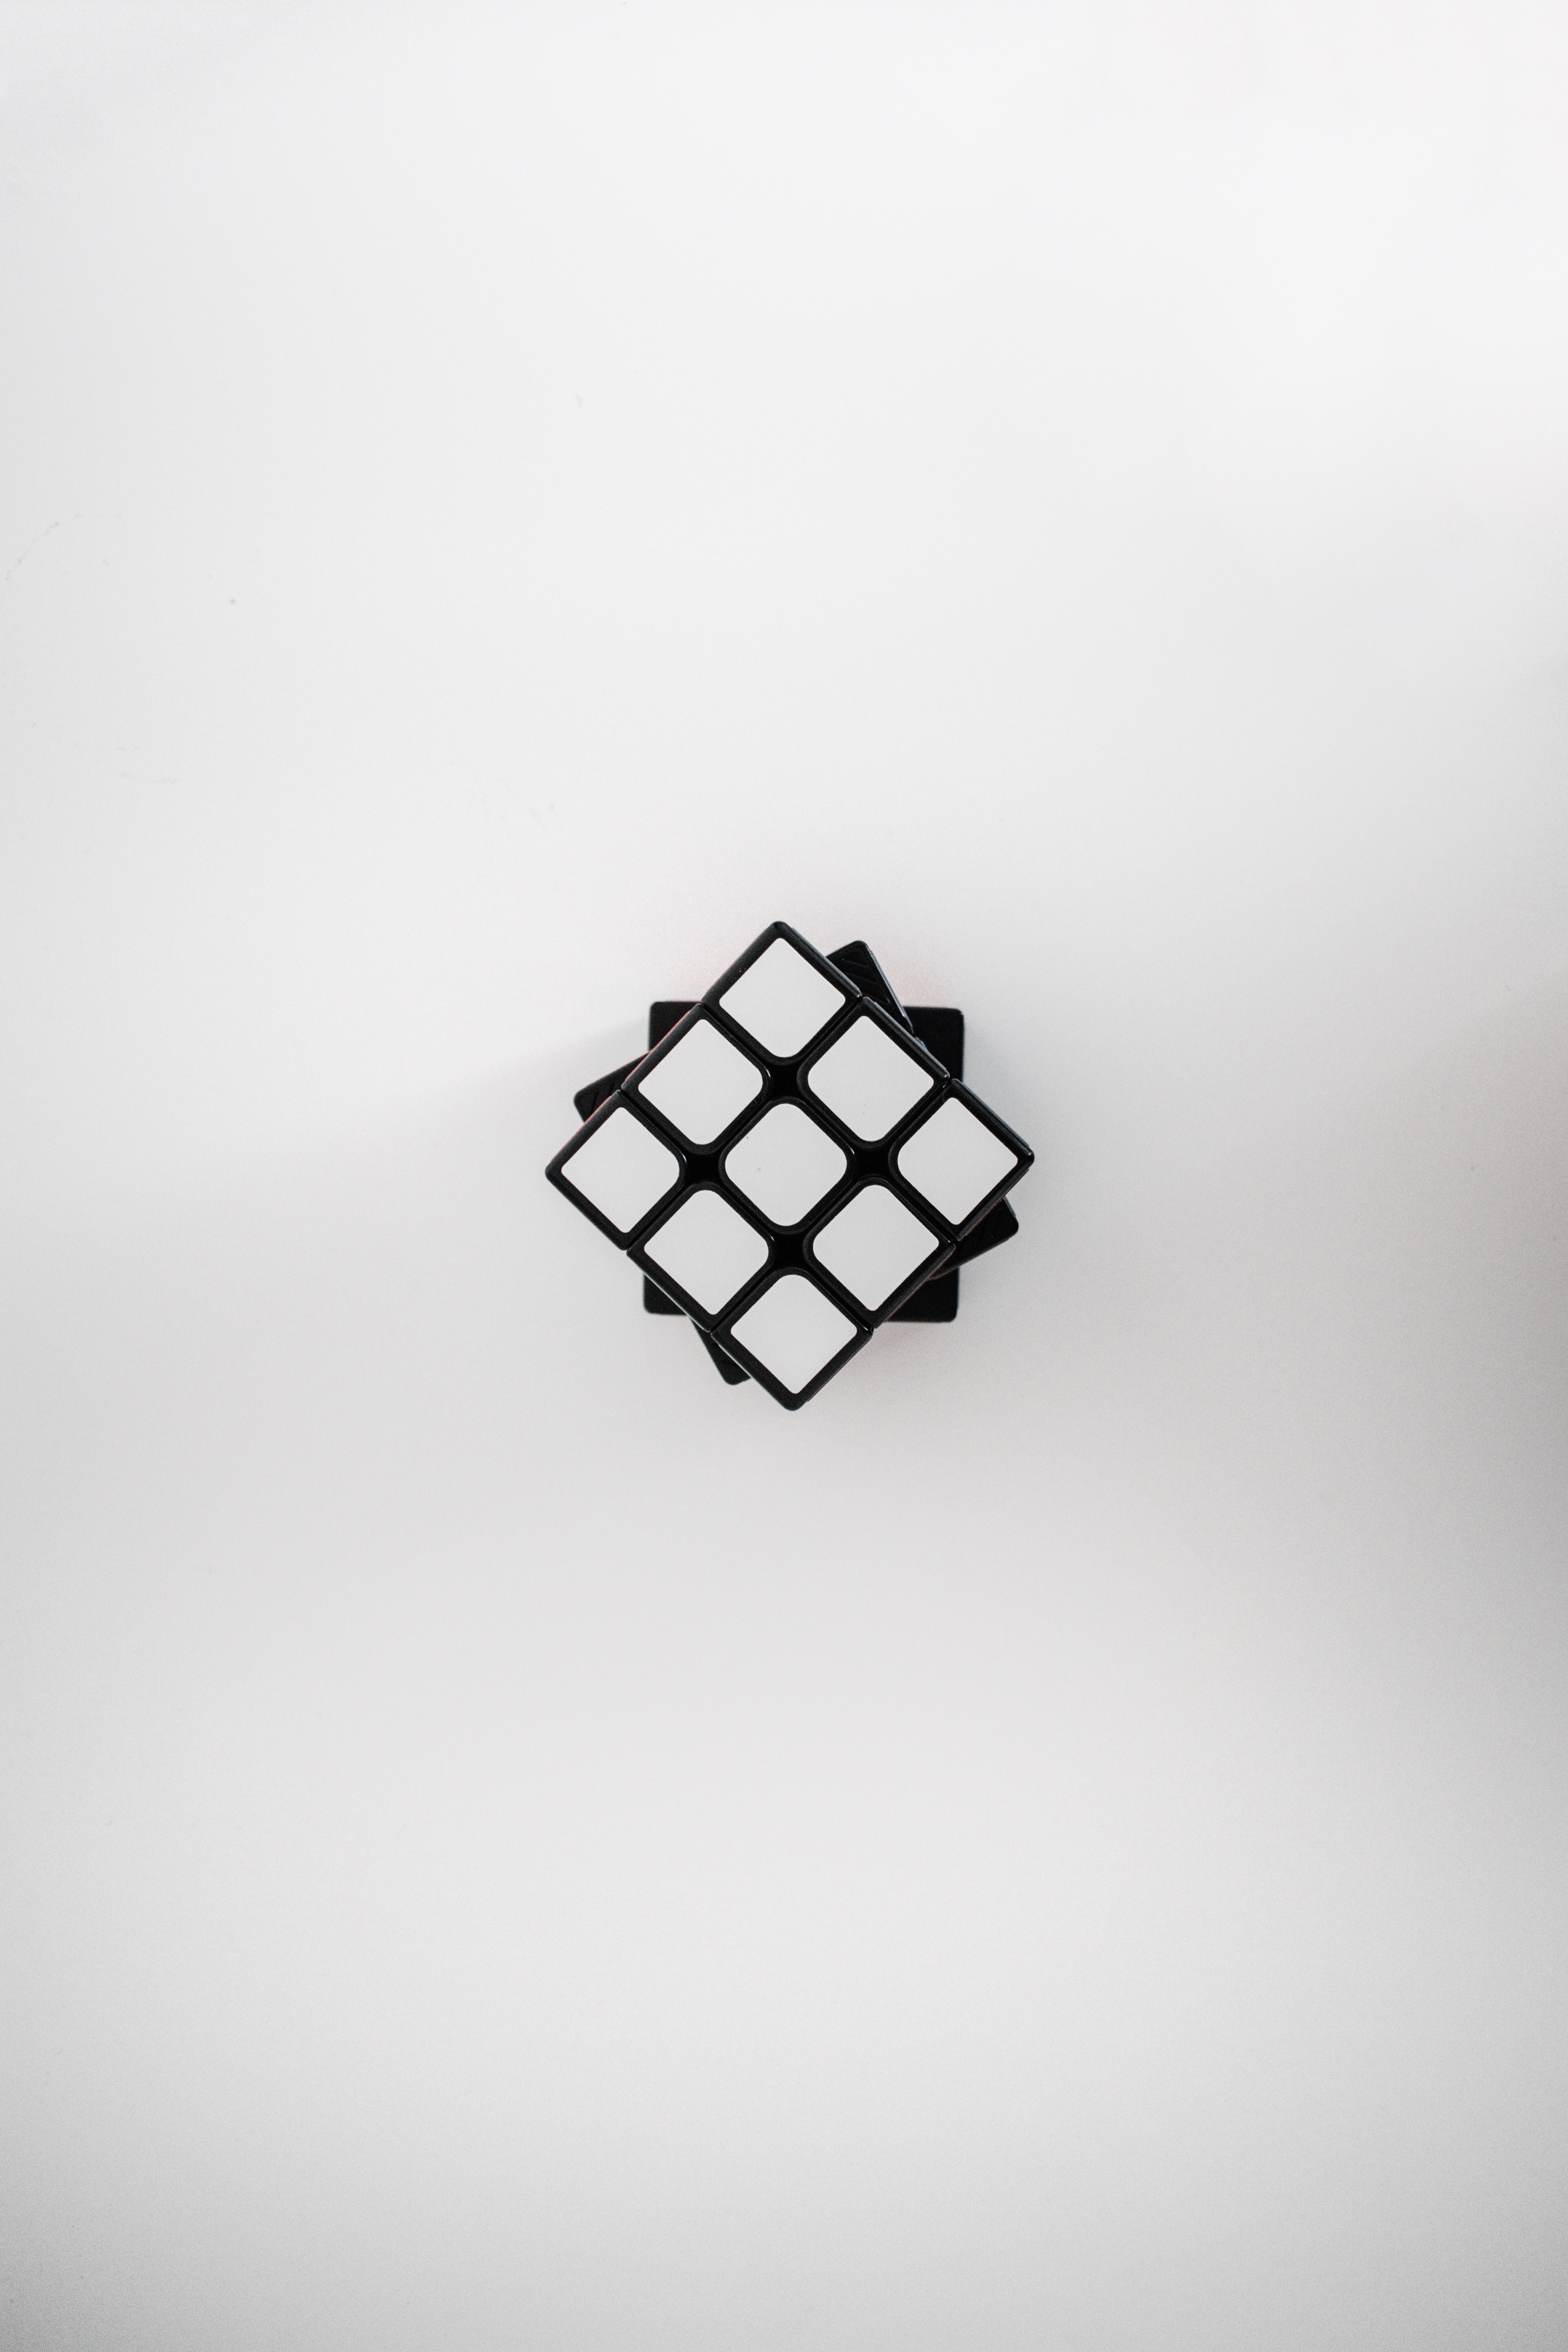 rubik's cube, miscellanea, cube, white, view from above, miscellaneous HD wallpaper